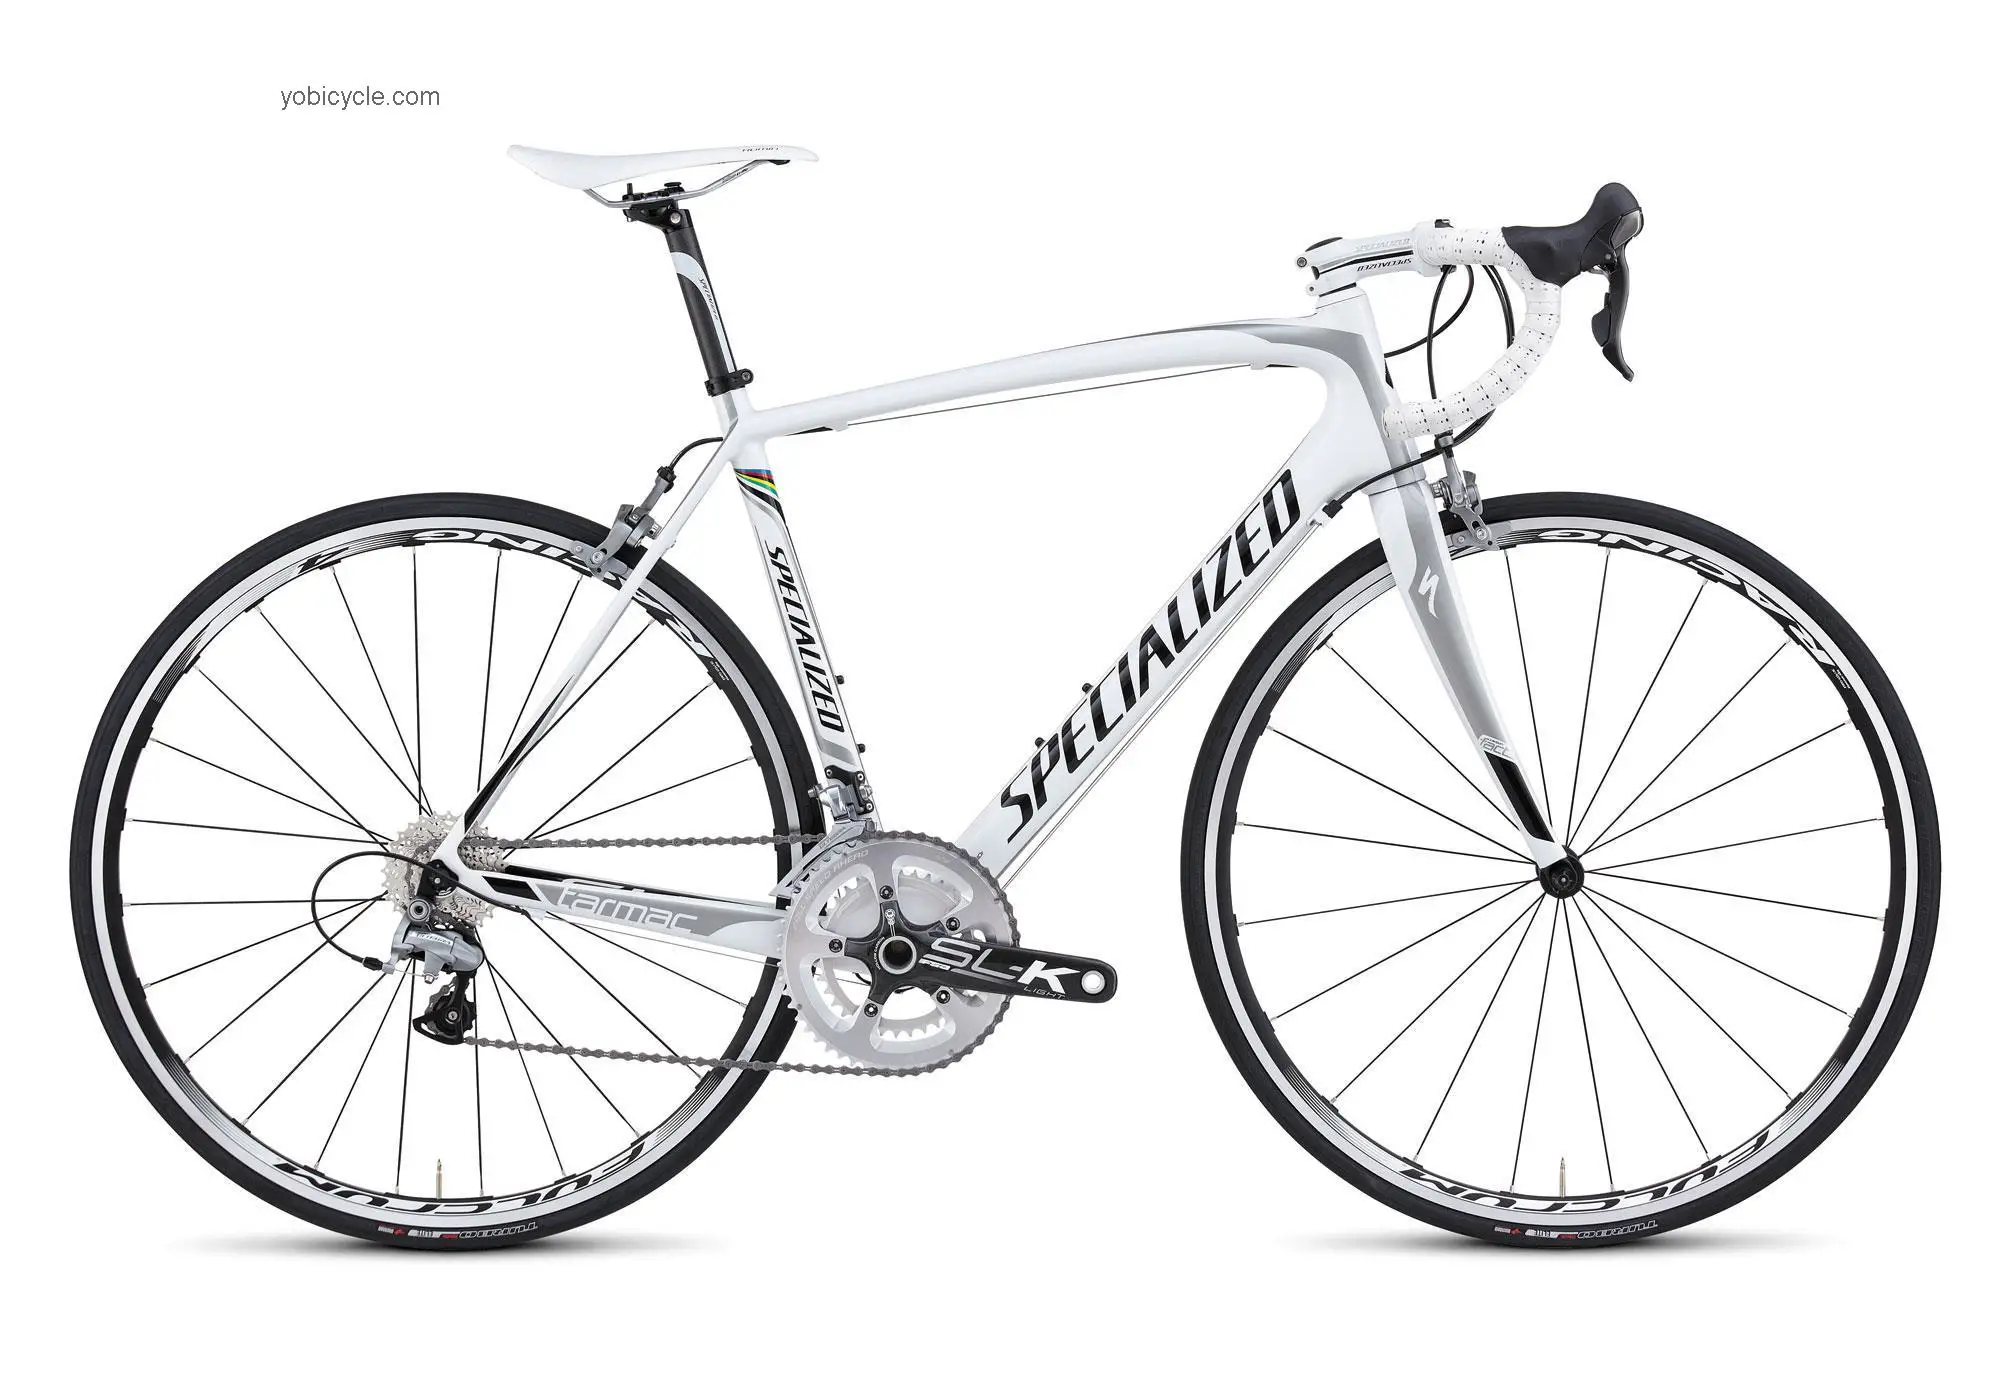 Specialized  Tarmac Expert SL3 M2 Technical data and specifications